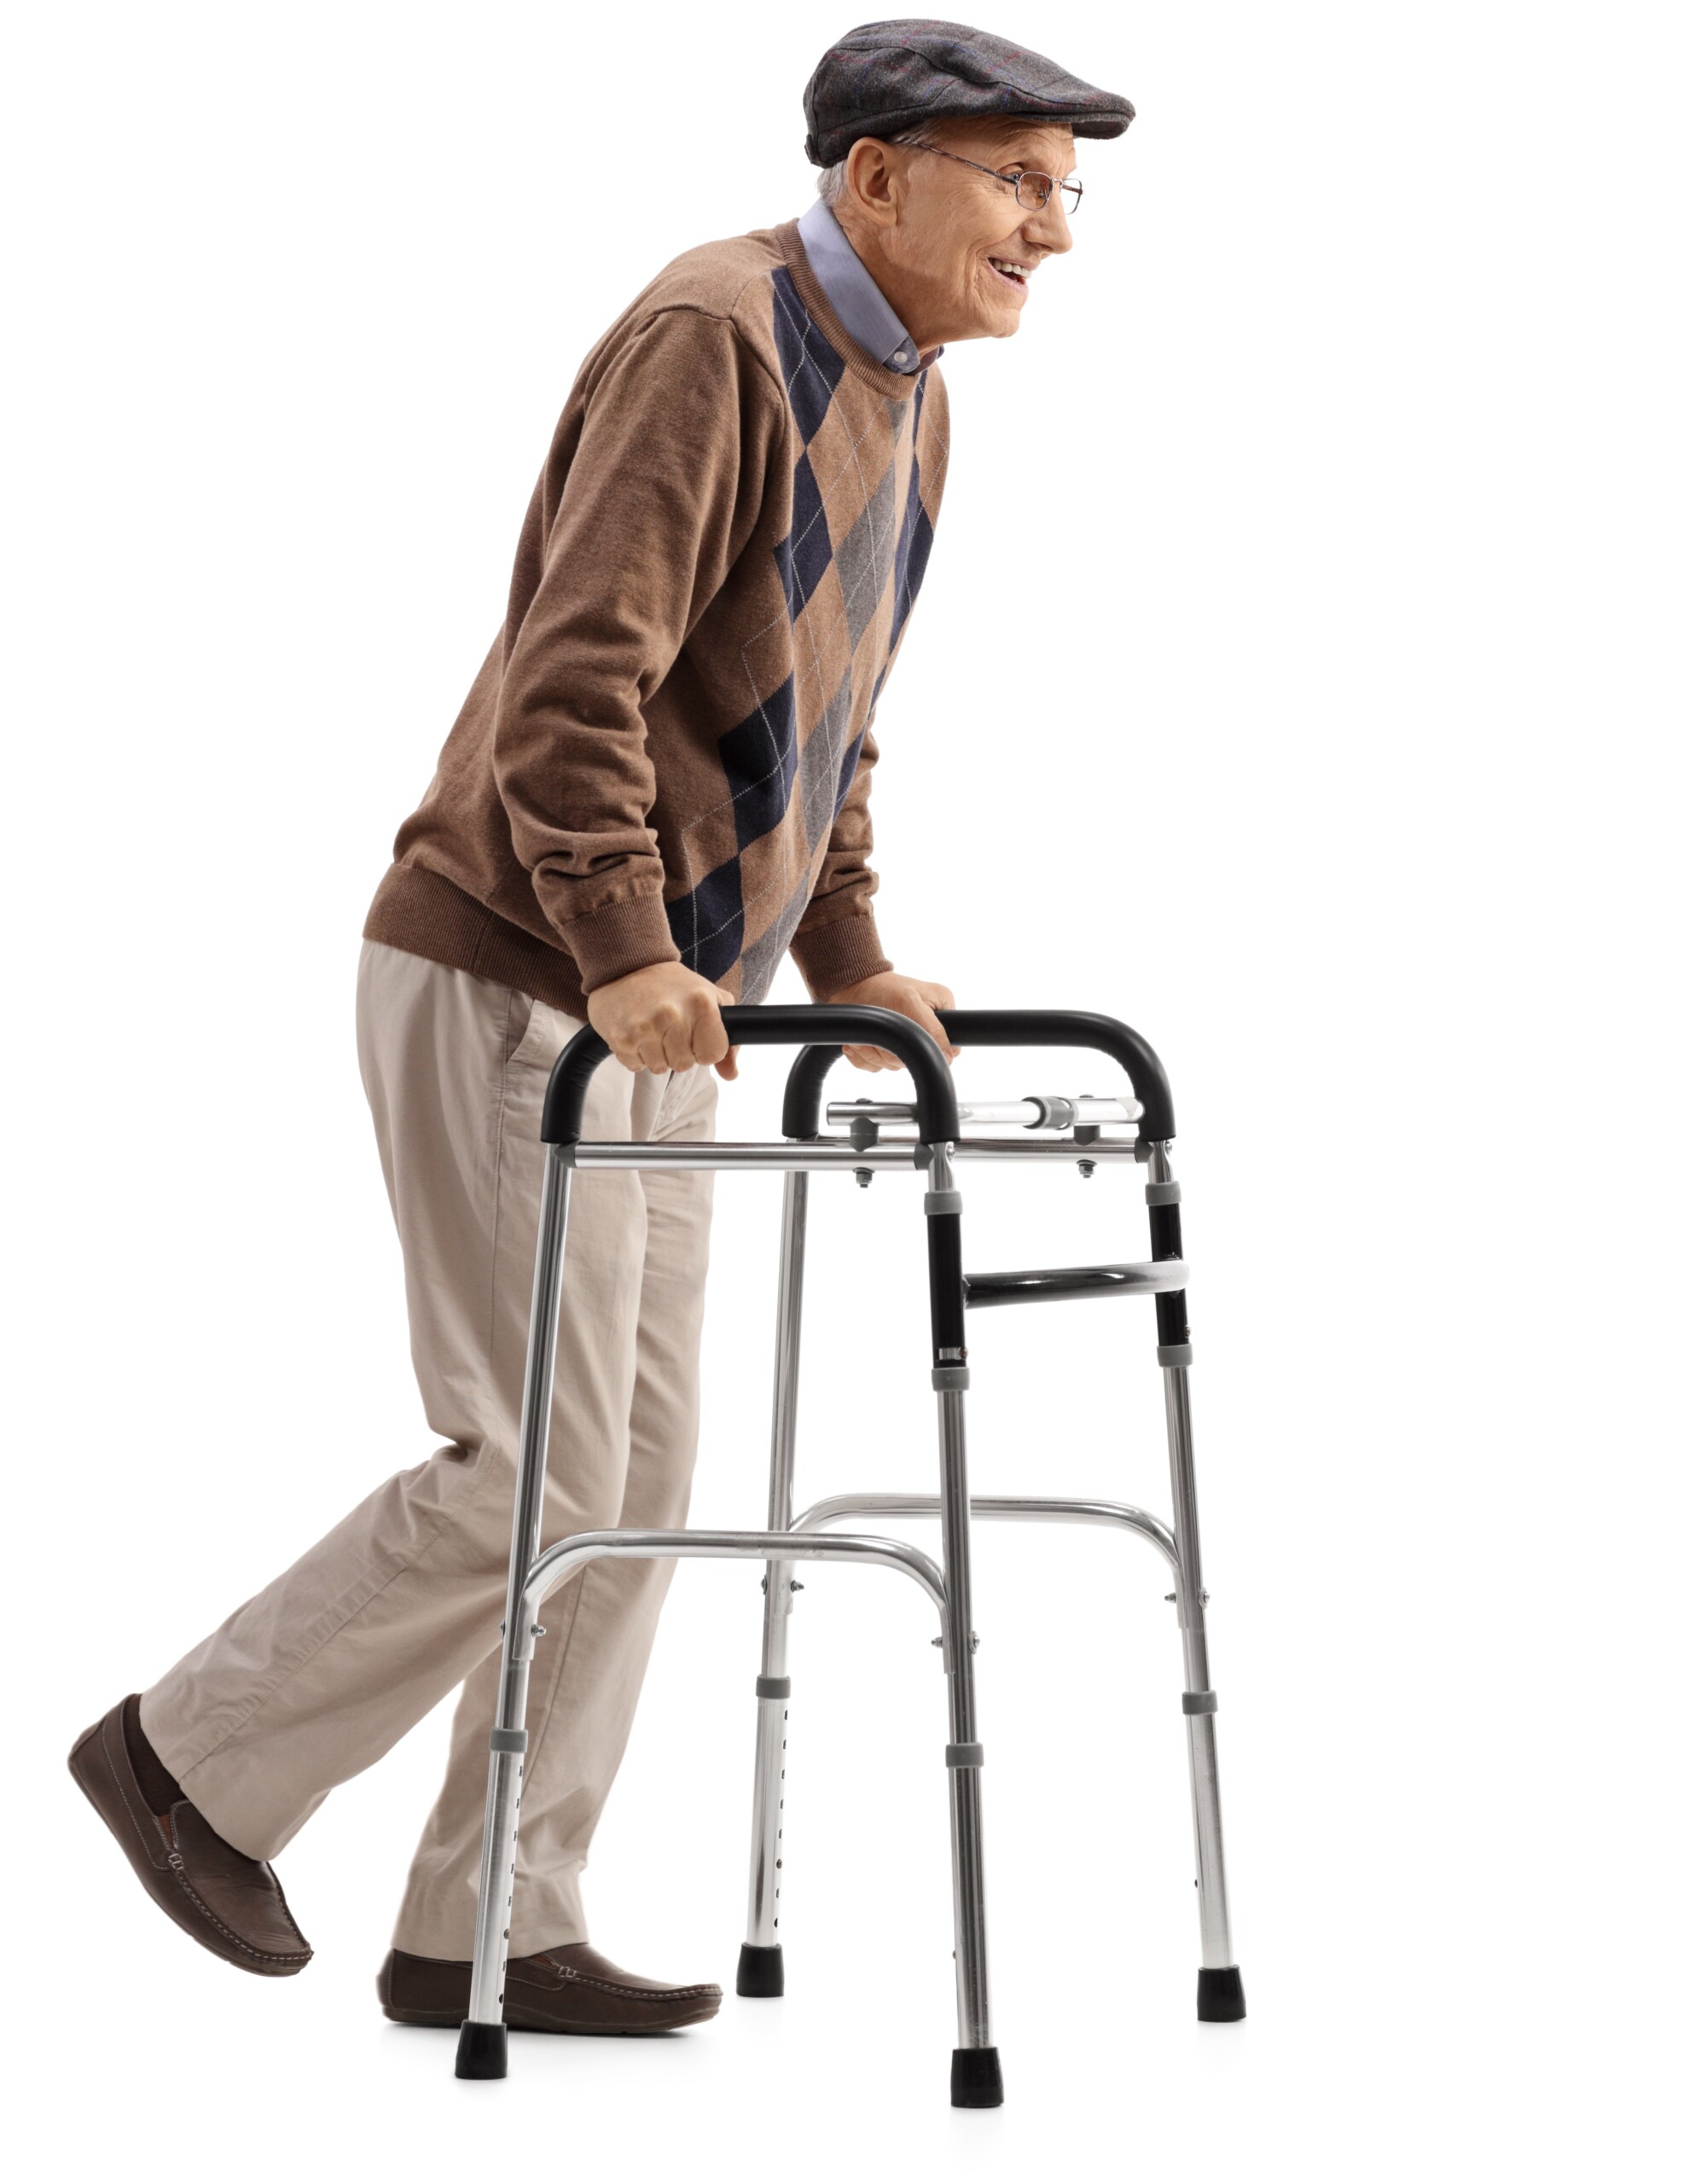 How to Convince Elderly Parent to Go from Walker to Scooter